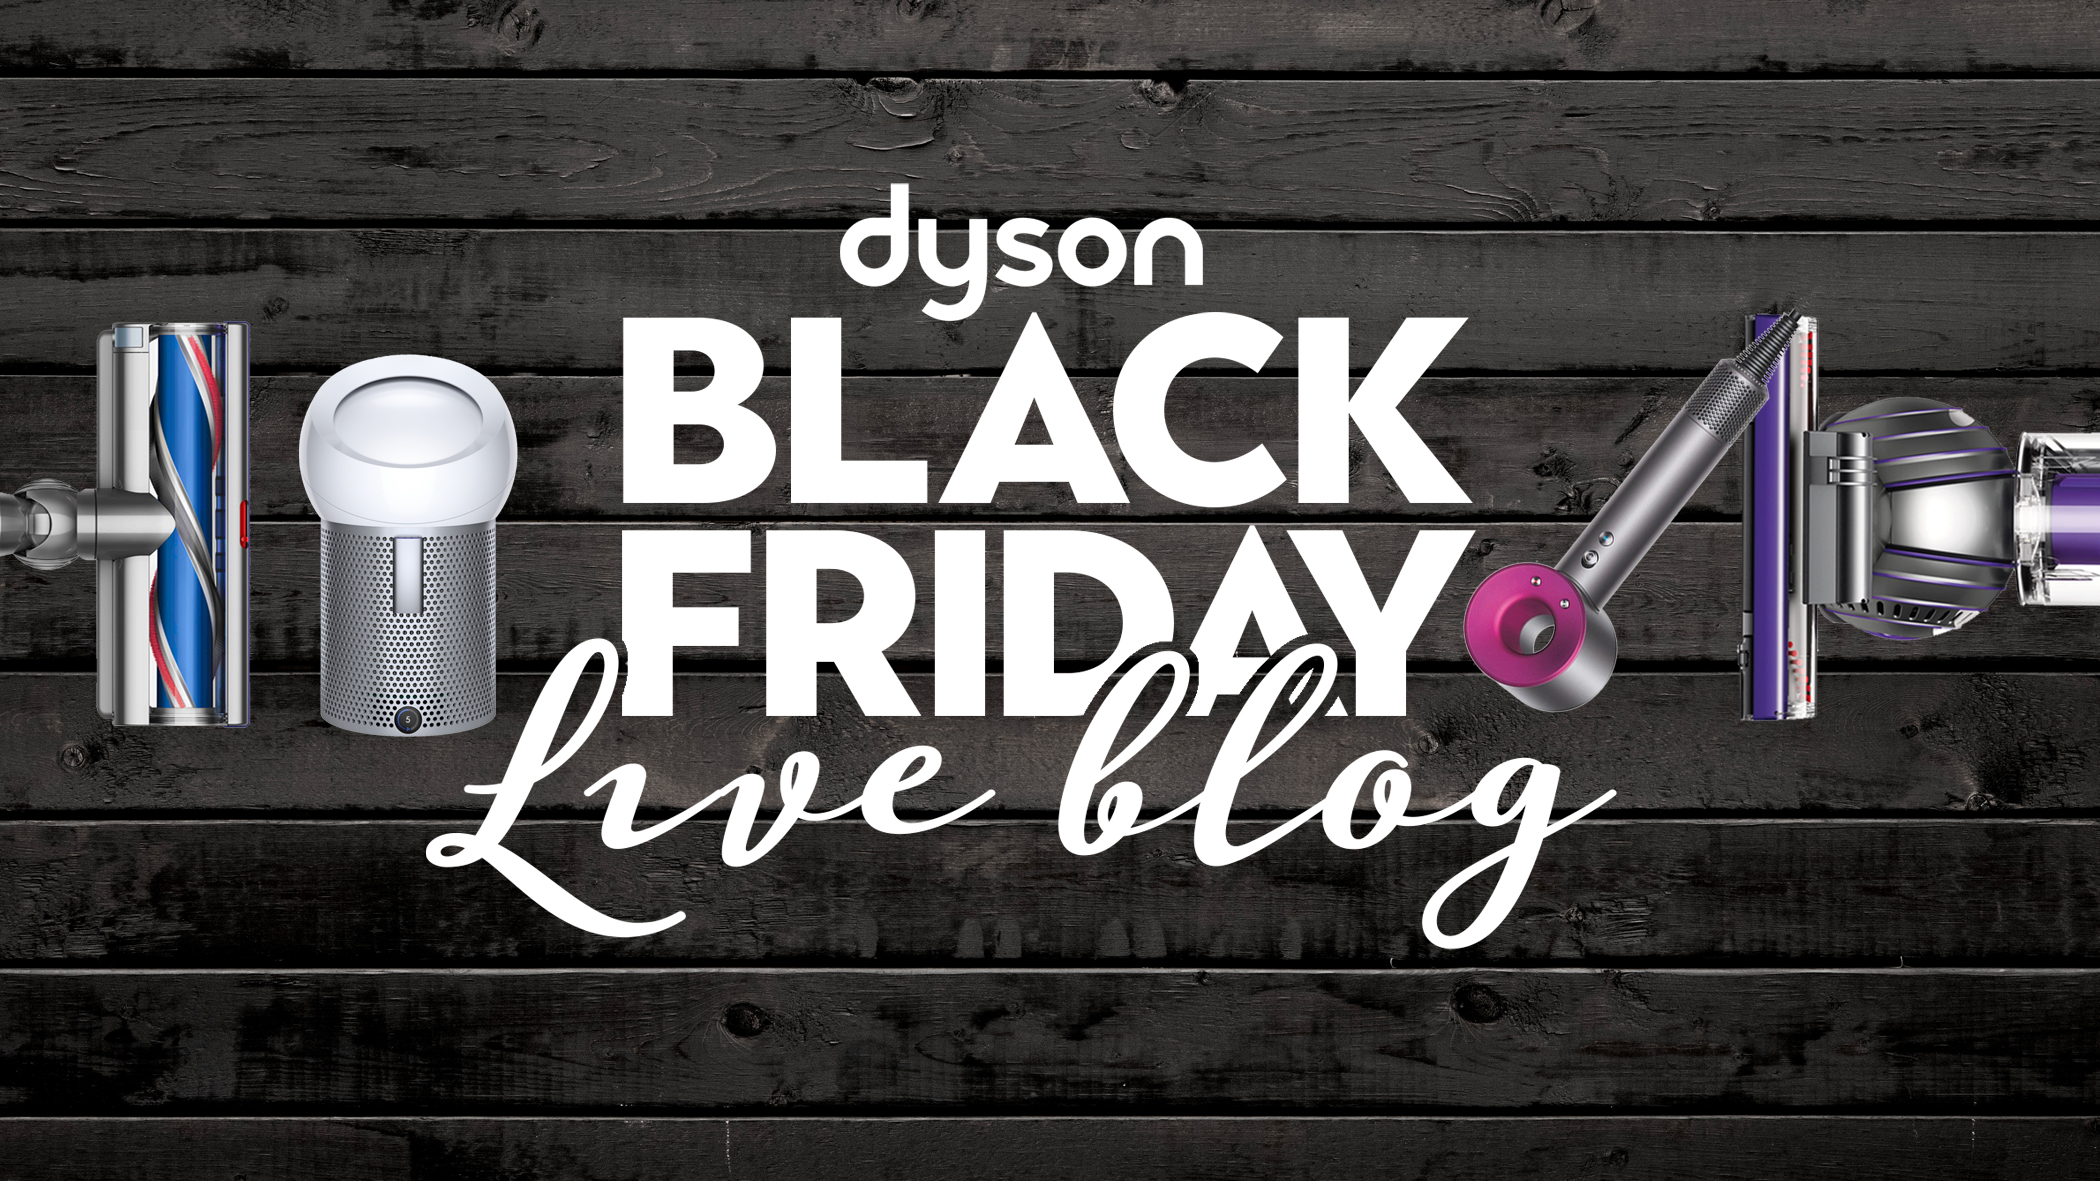 Dyson Black Friday live blog - the best deals on vacuums, hair styling tools and fans